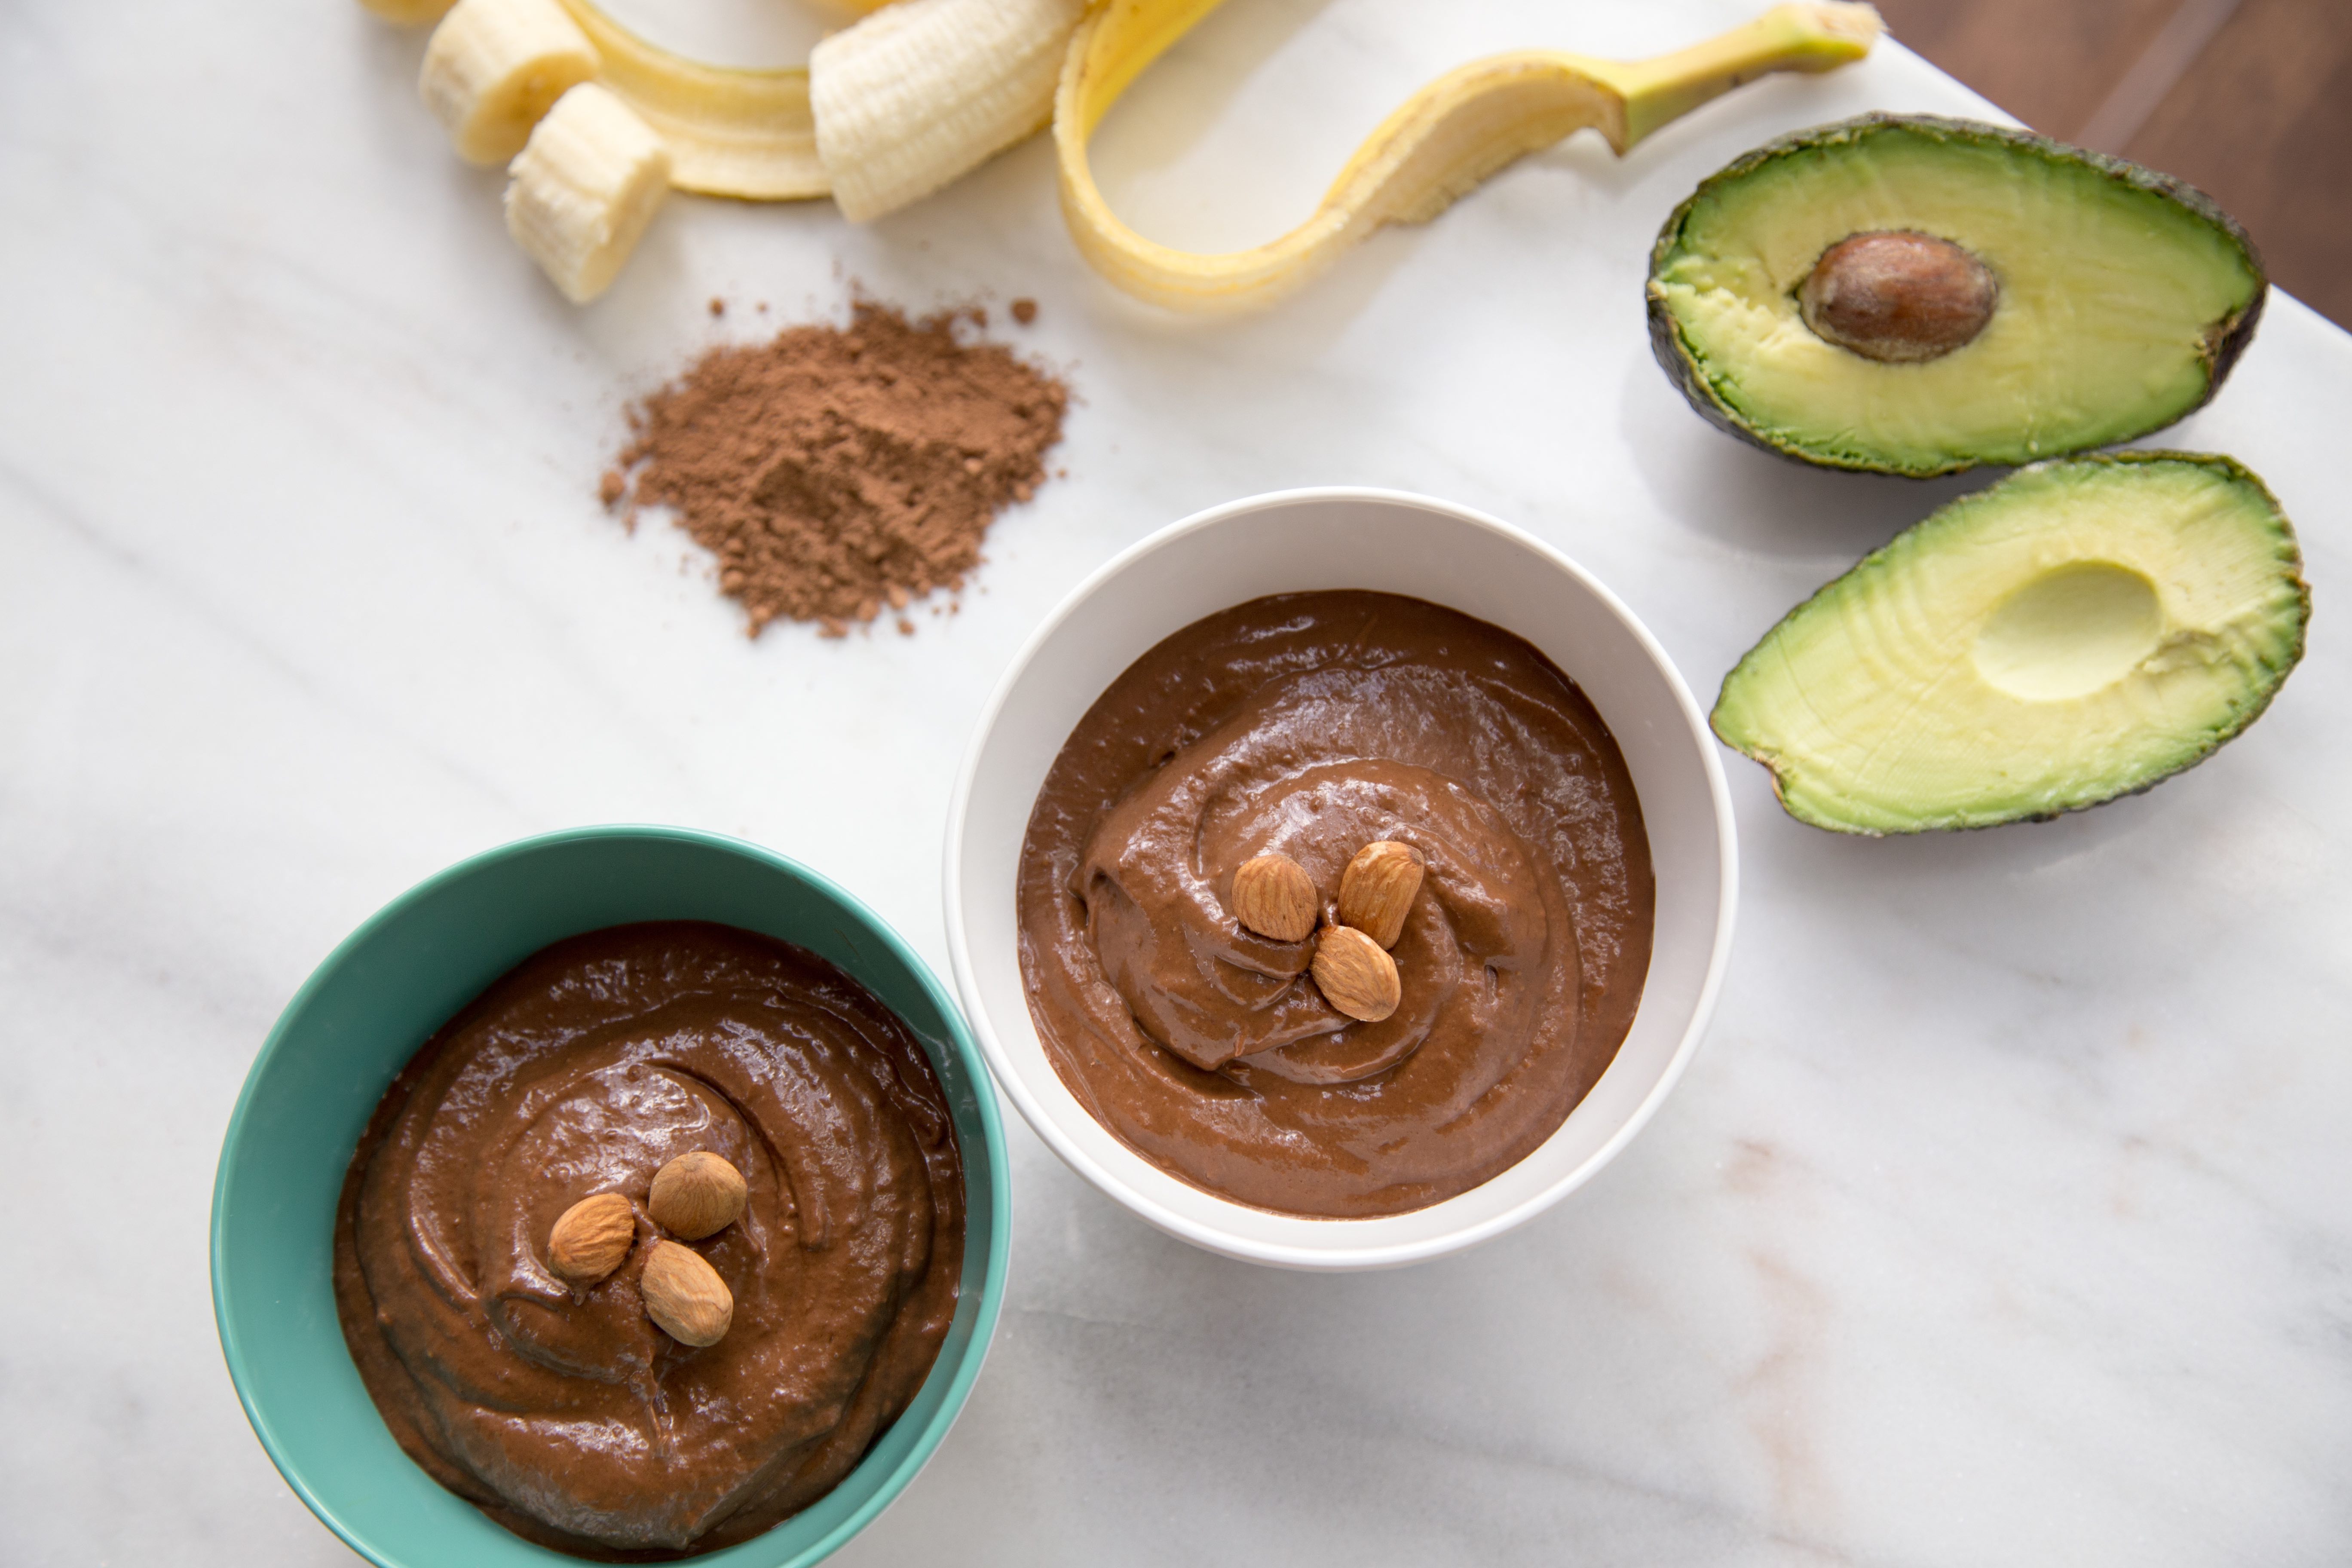 A bowl of vegan chocolate pudding. This dessert has no sugar and the ingredients used can be beneficial to your health.